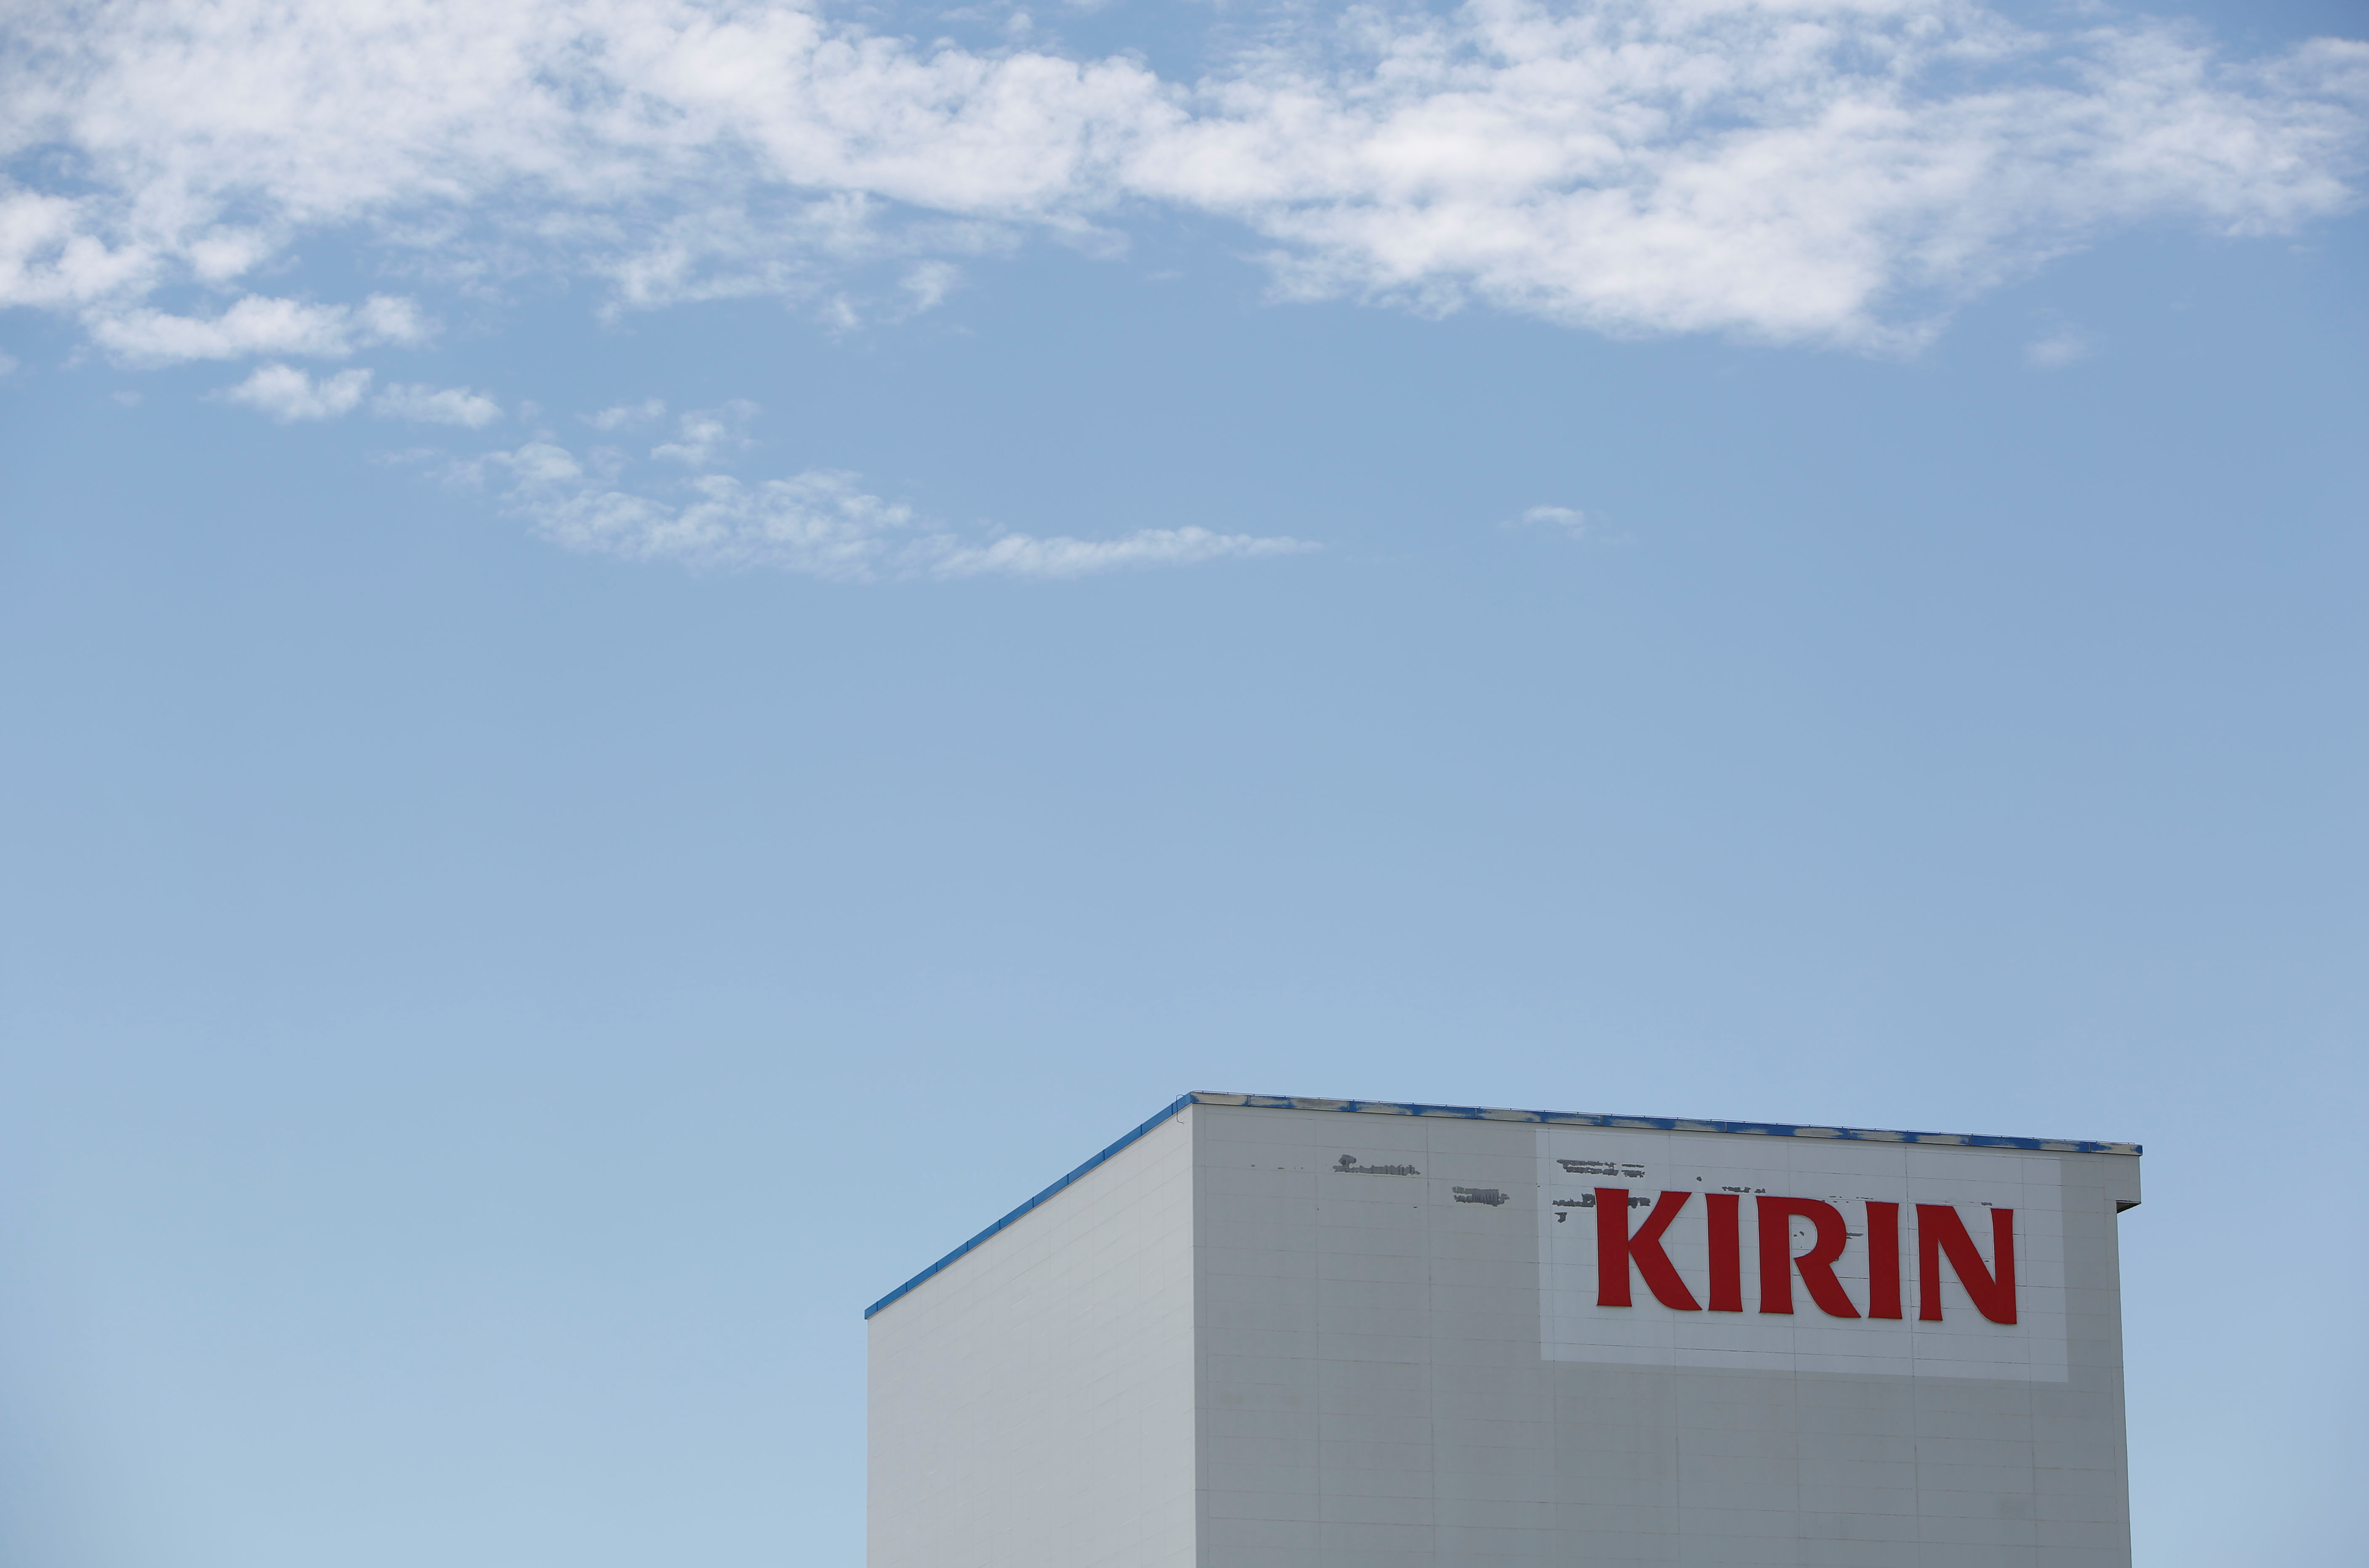 Japanese brewer Kirin Holdings' logo is seen at its factory in Toride